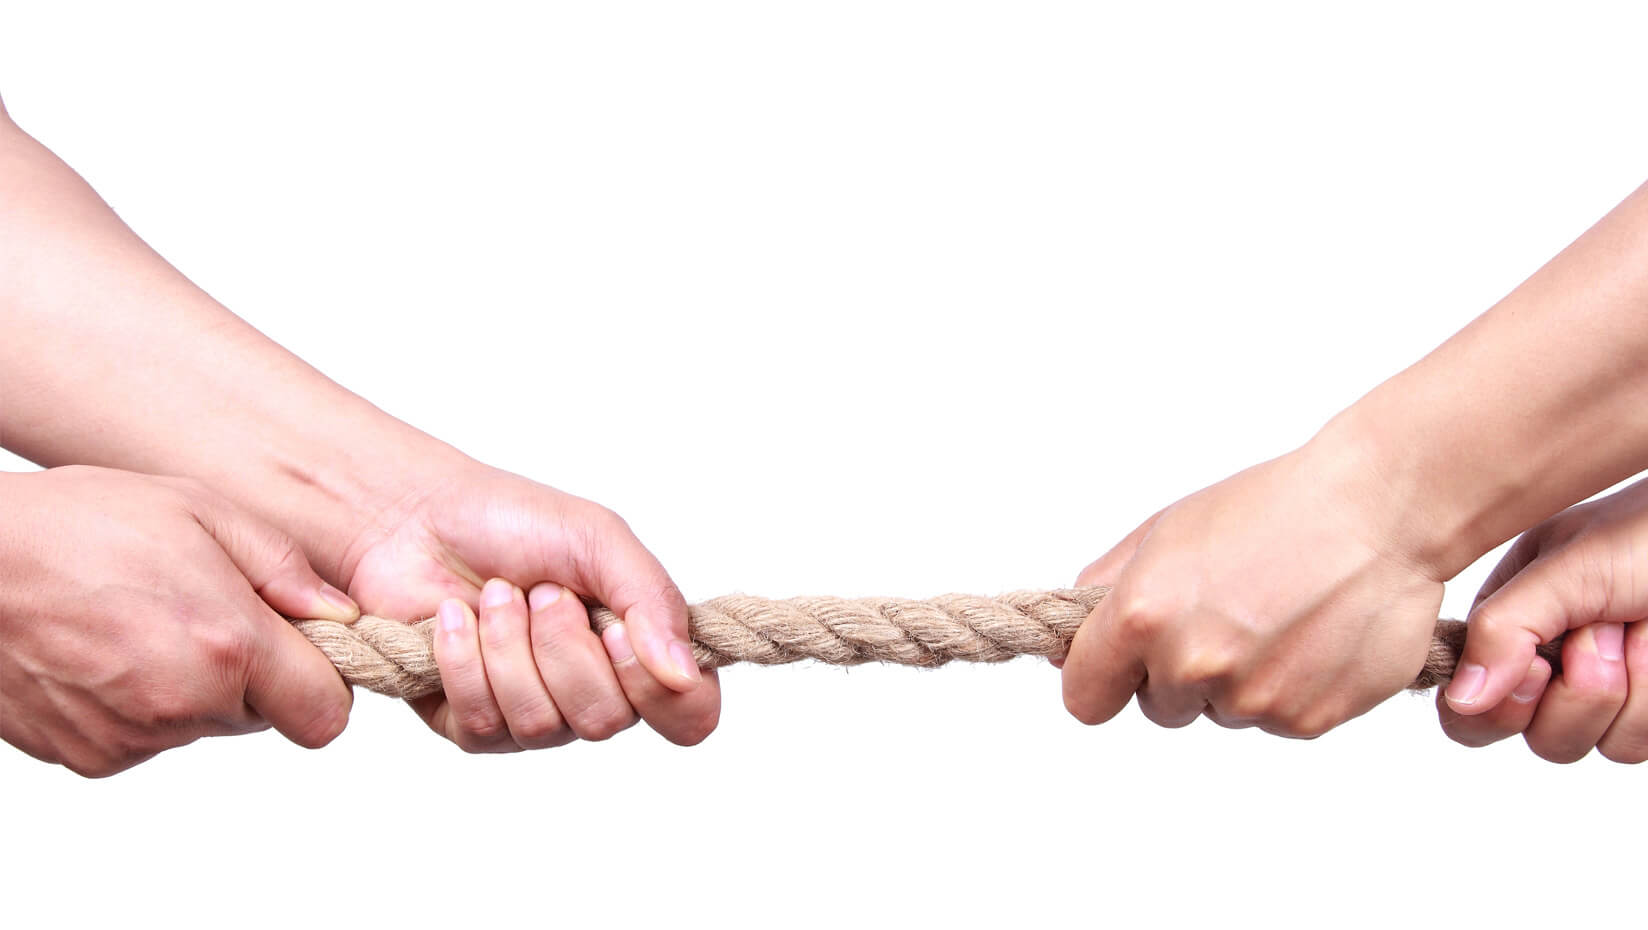 Hands pulling on a rope